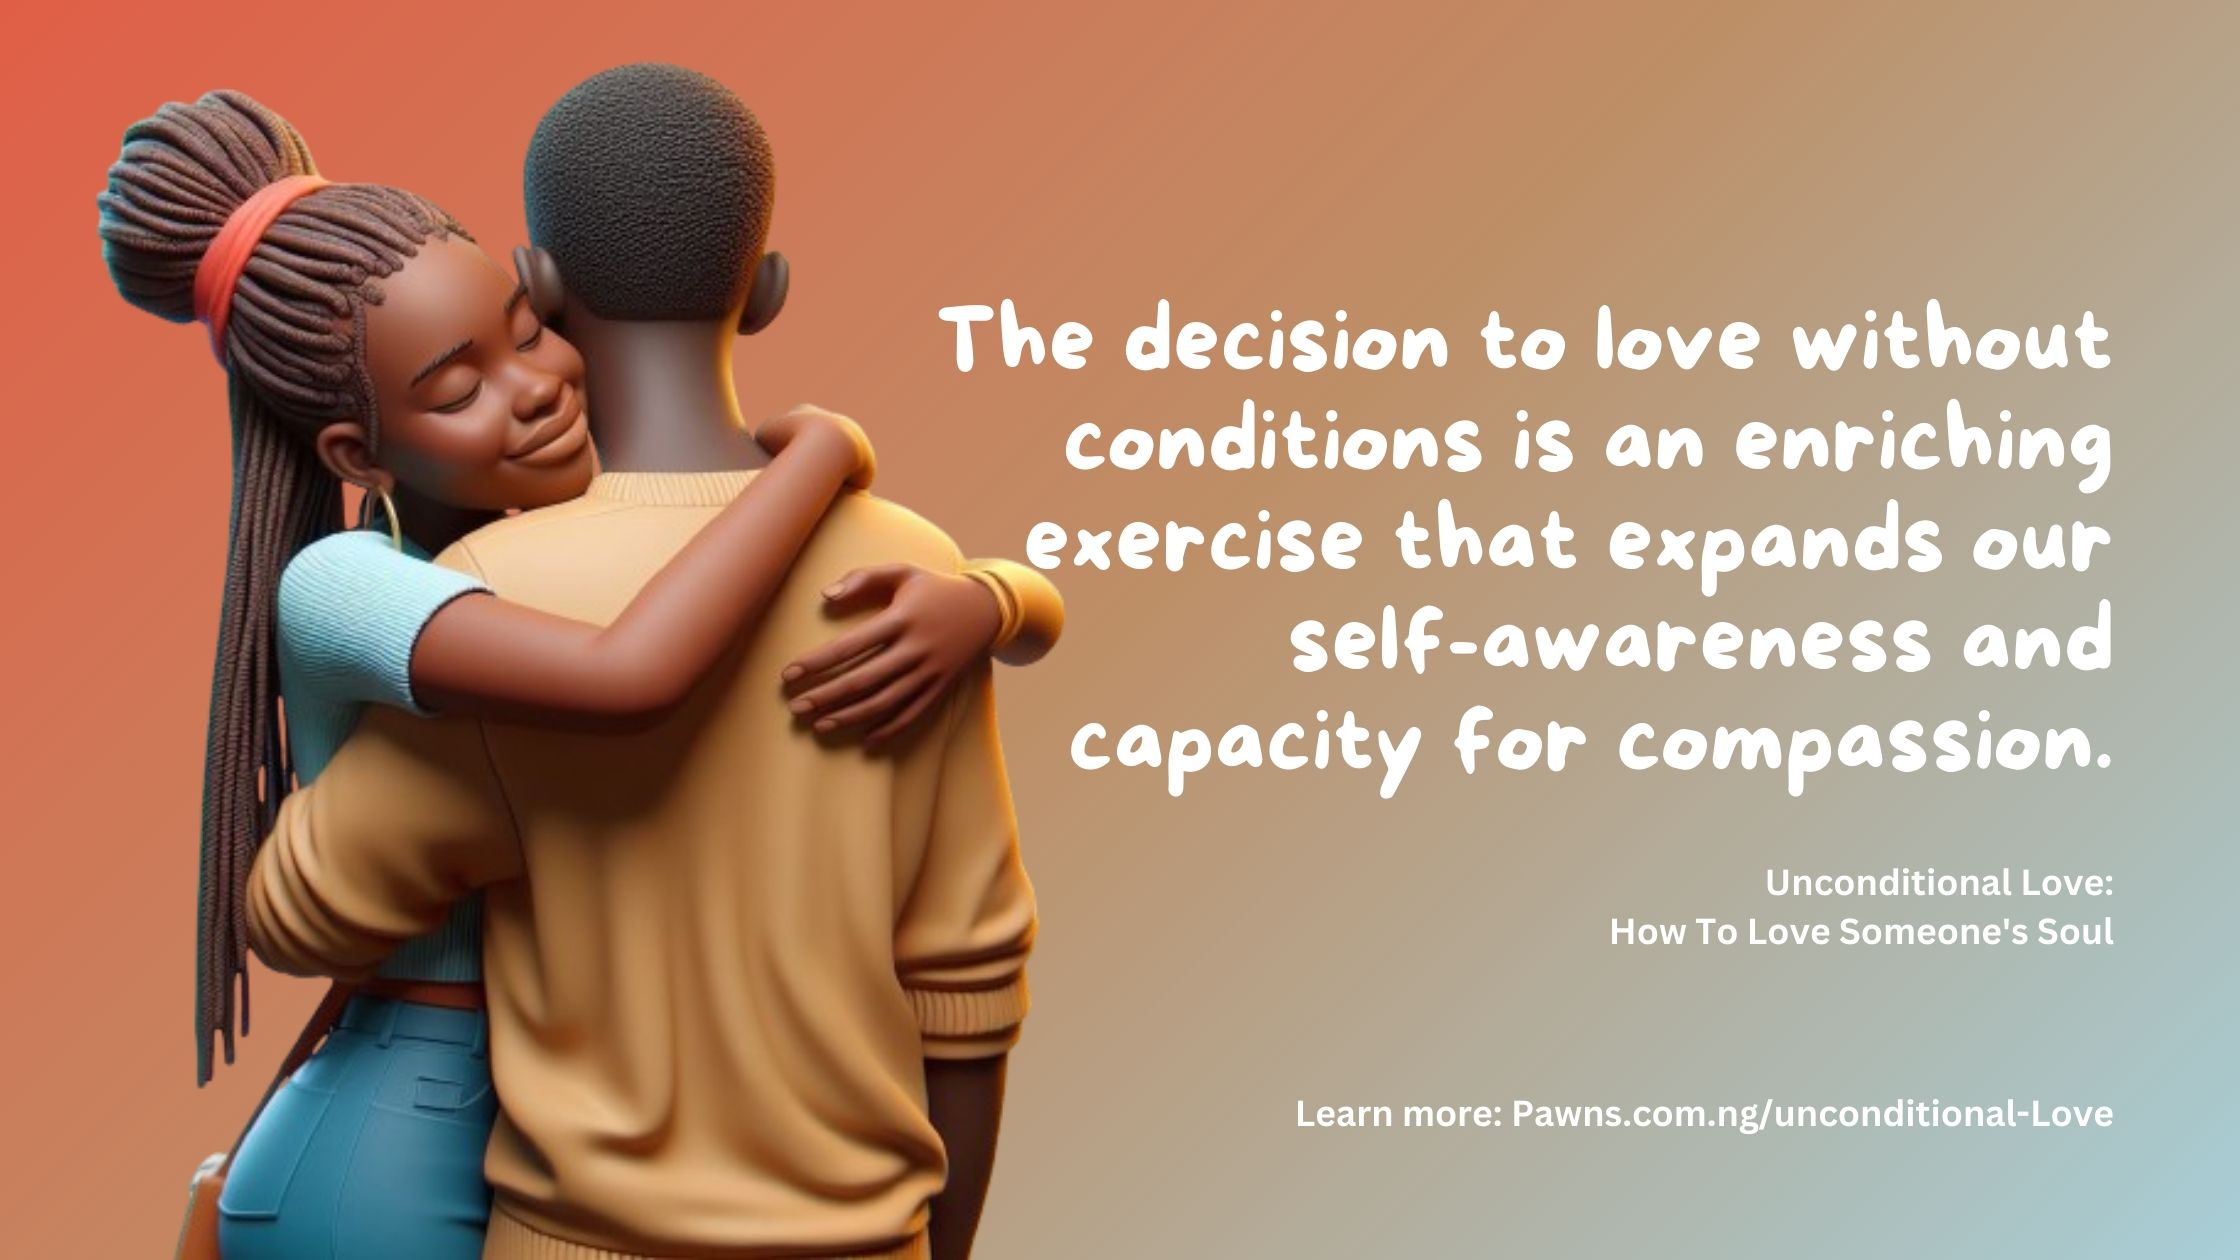 The decision to love without conditions is an enriching exercise that expands our self-awareness and capacity for compassion. Unconditional Love How To Love Someone's Soul